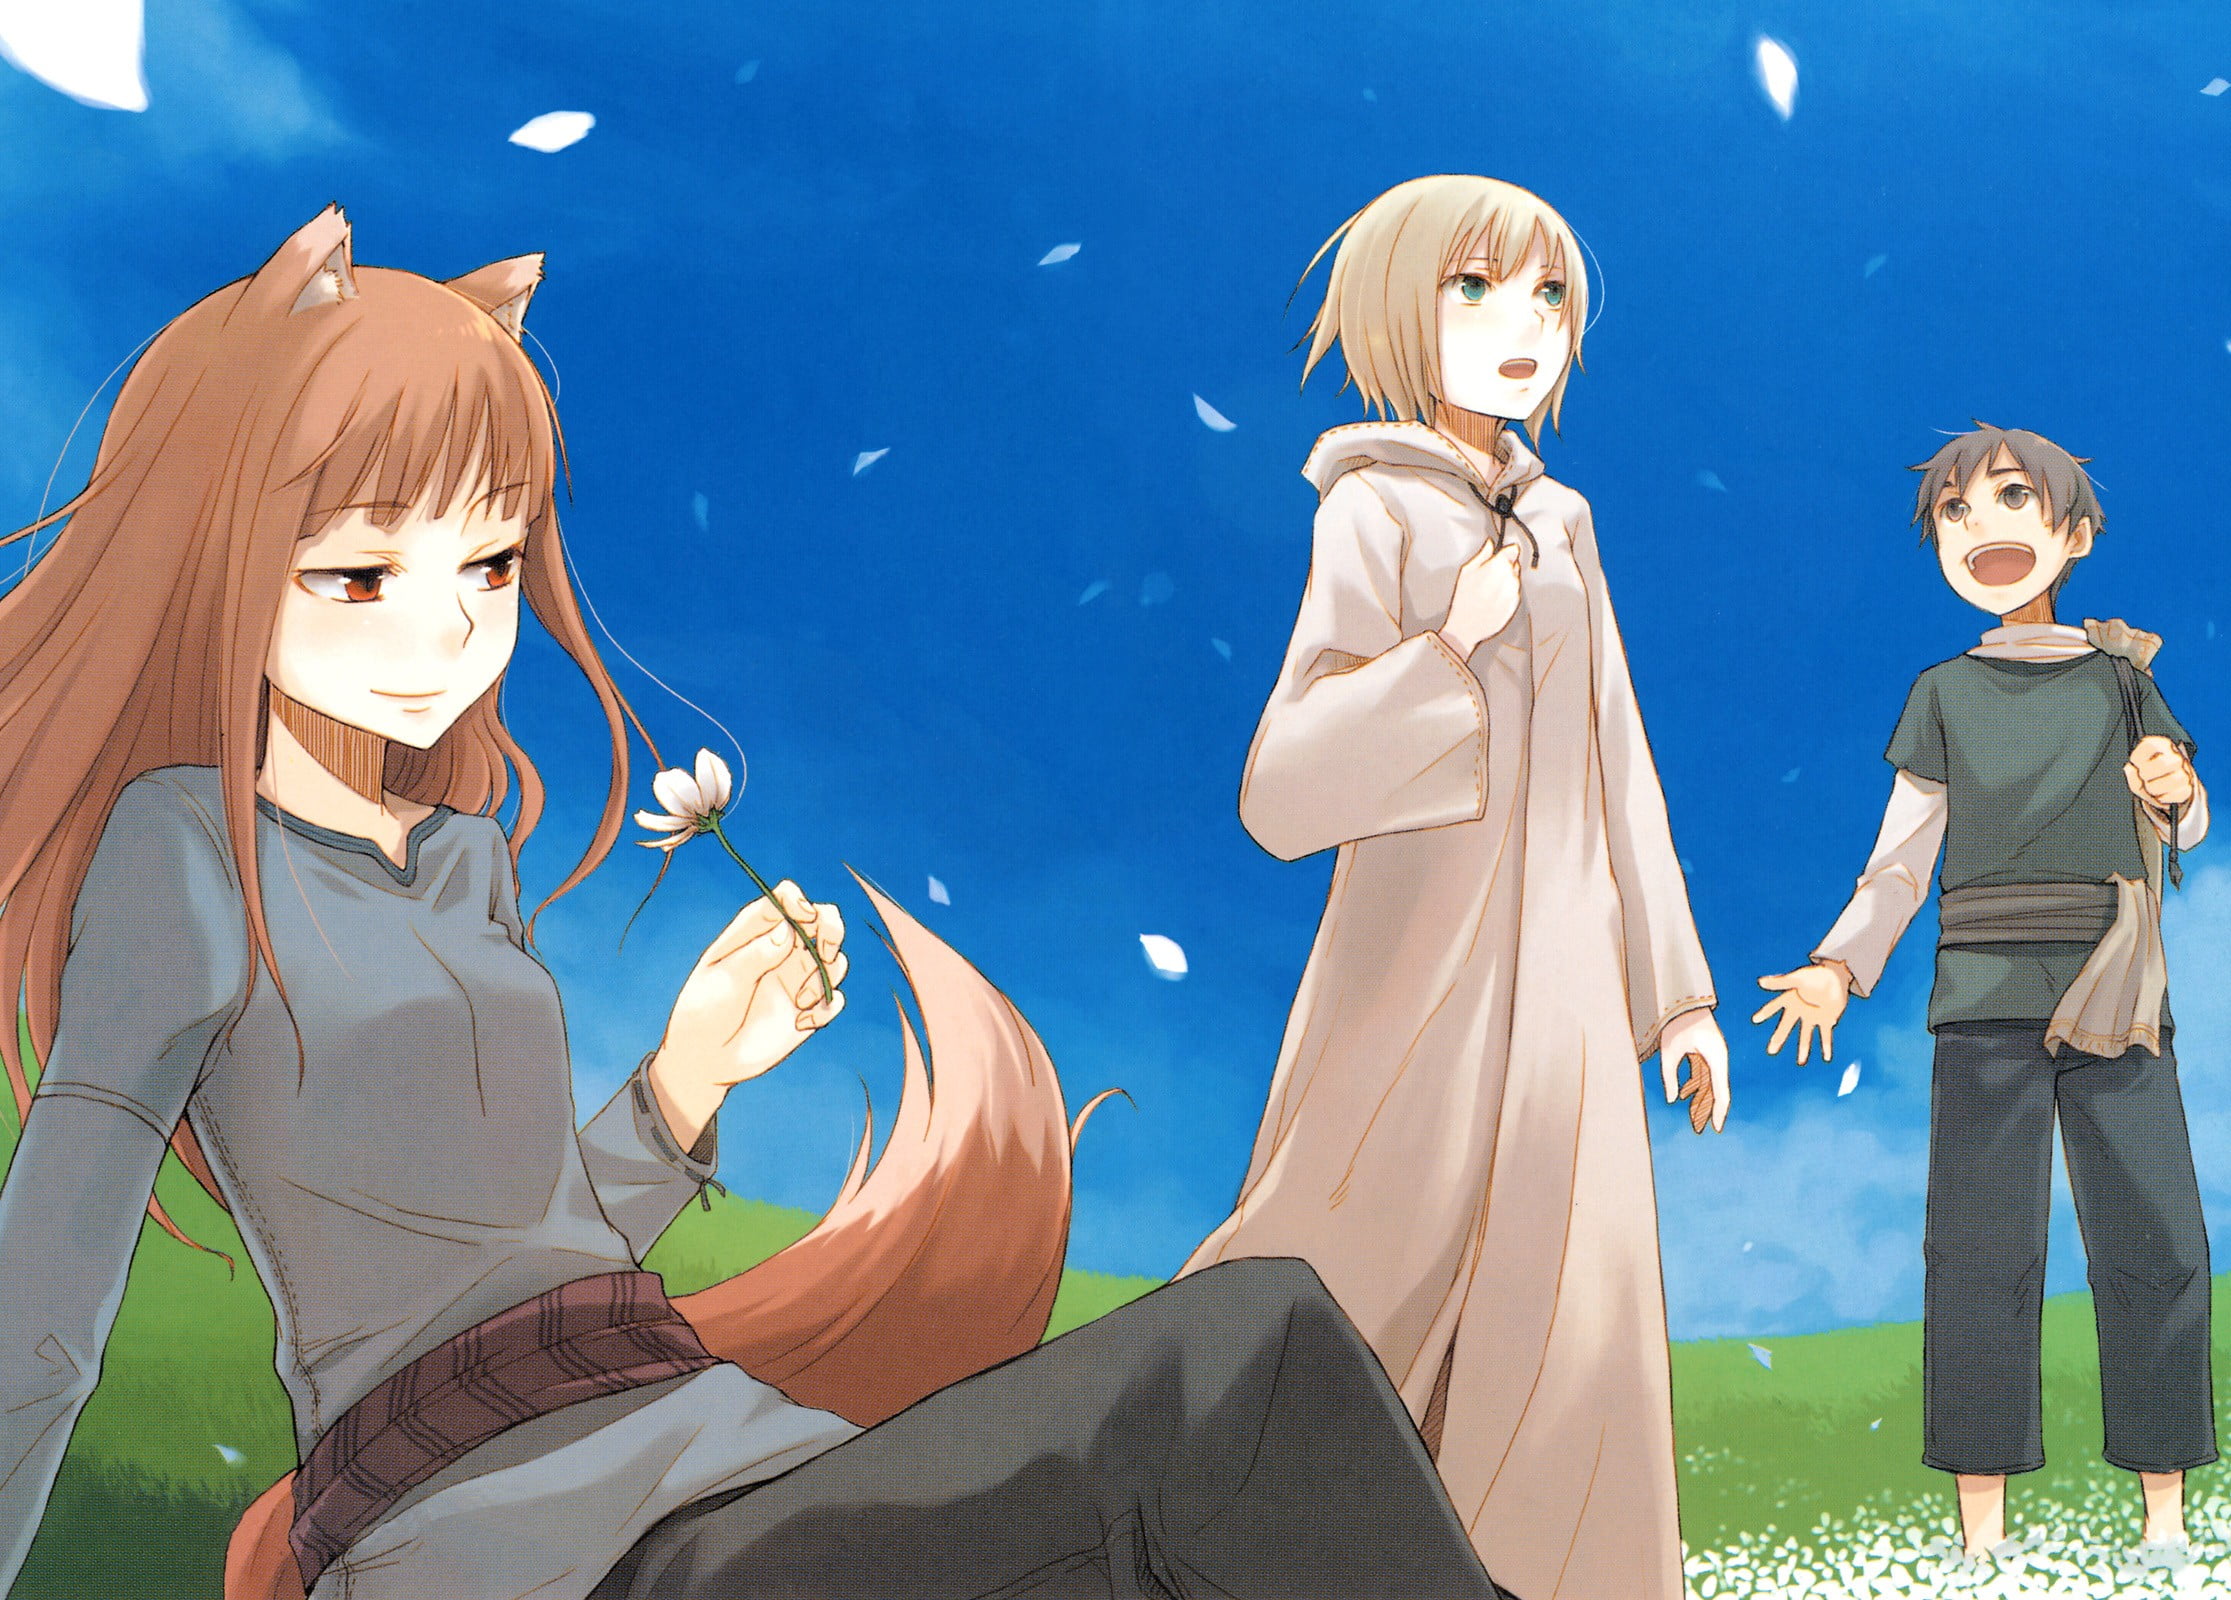 women's white and blue traditional dress, Spice and Wolf, Holo